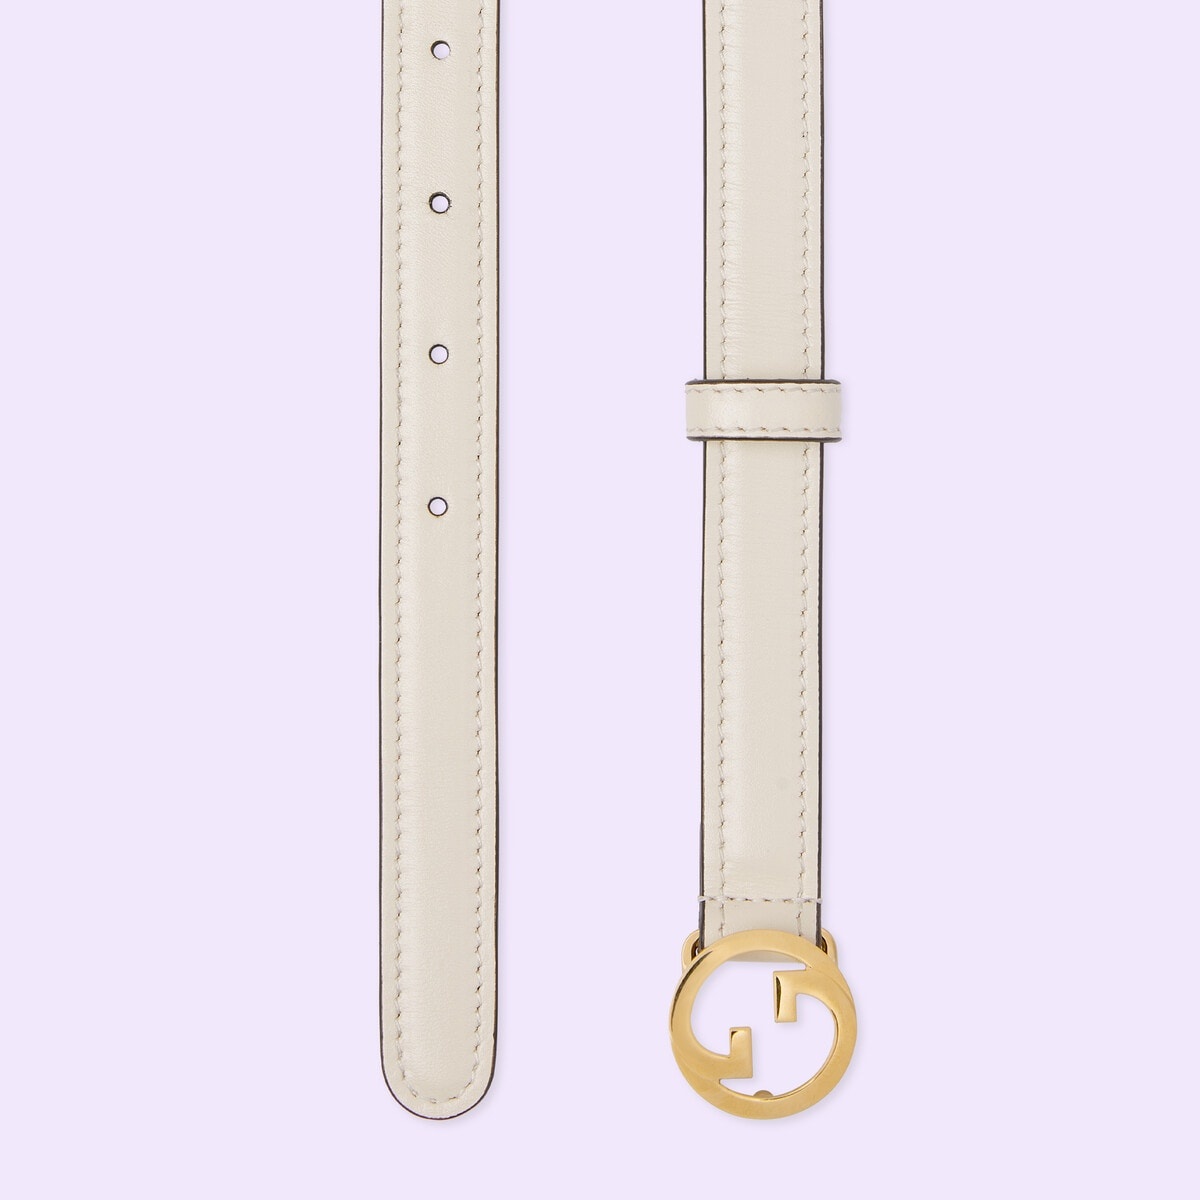 Gucci Thin Belt with Crystal Gucci Buckle, Size Gucci 85, White, Leather